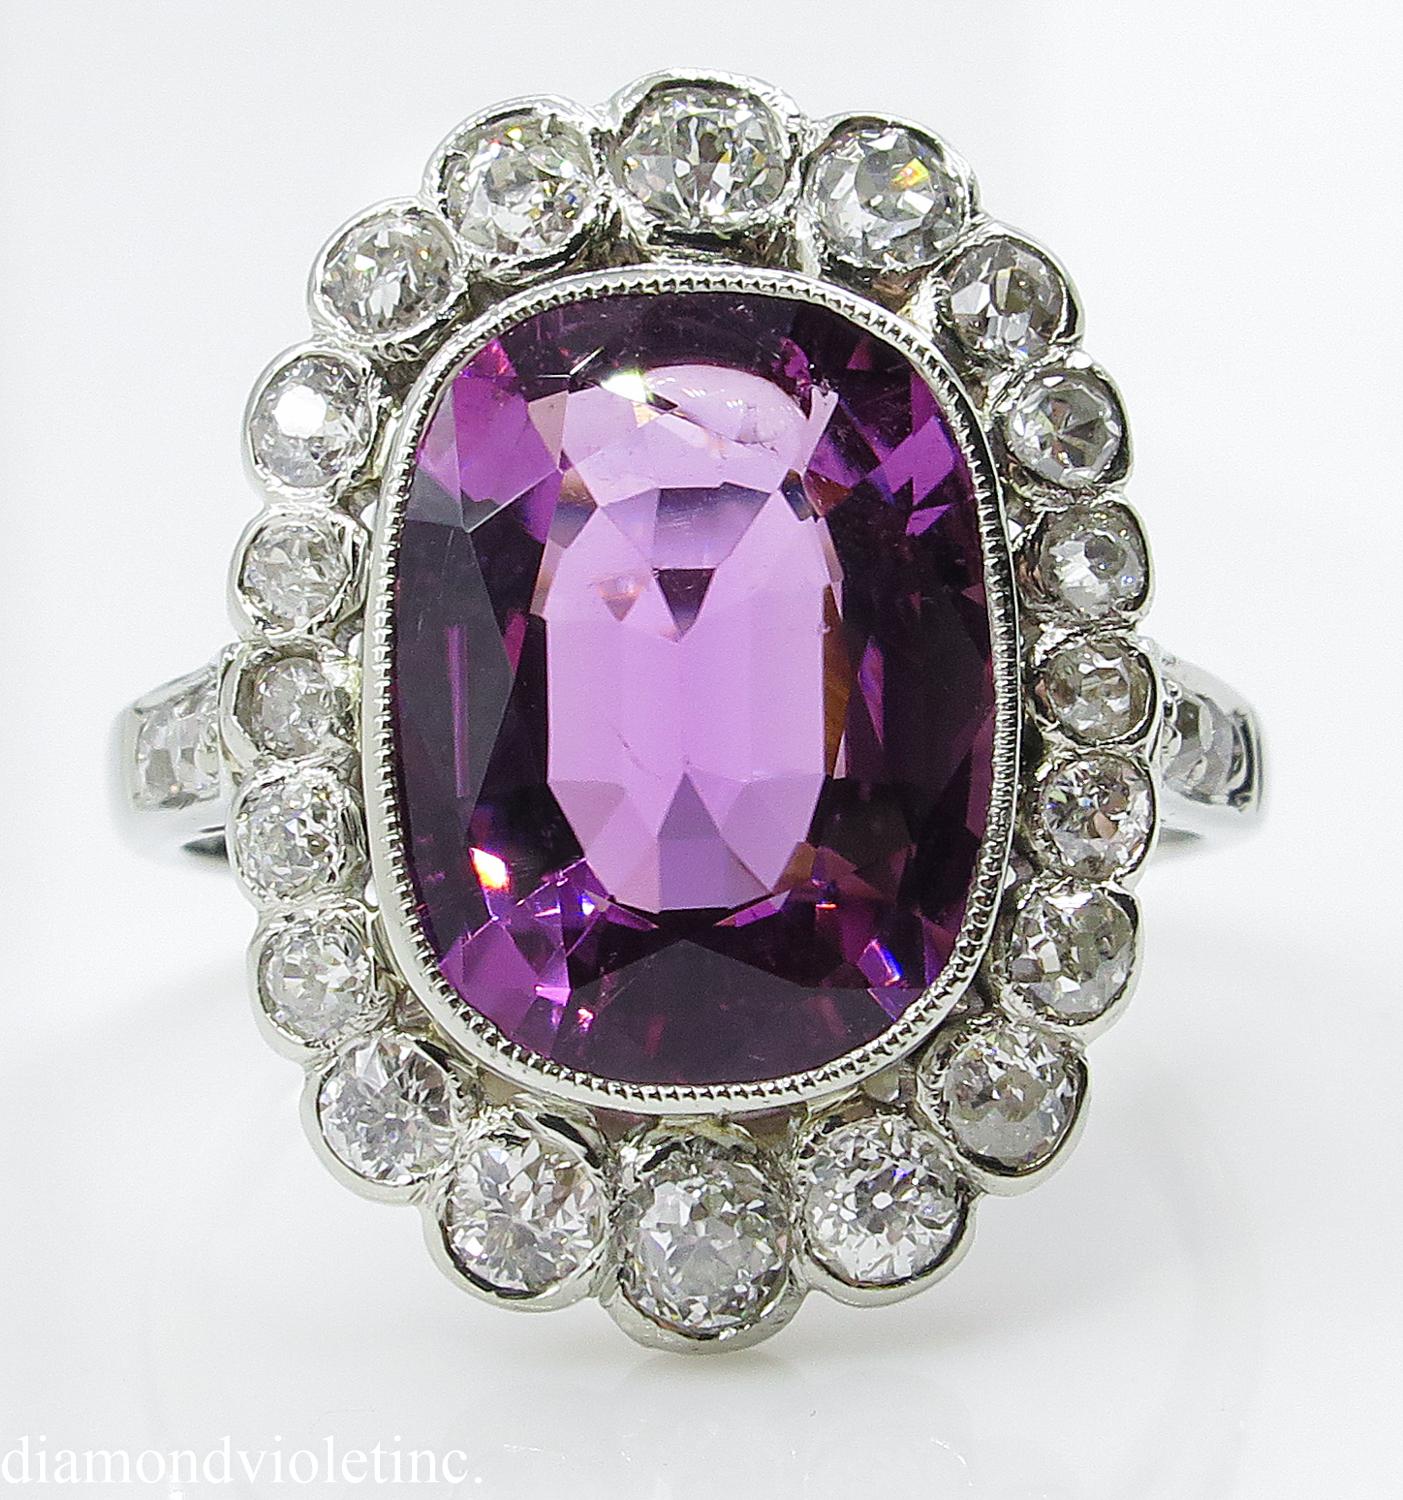 A super RARE find from our Estate Color Stone Collection! The Tourmaline is beyond words!! Amazing Art Deco Tourmaline and Diamond Cluster Engagement Ring in 18k White Gold (tested) dazzles GAL Certified 4.55ct Cushion cut Tourmaline in Gorgeous